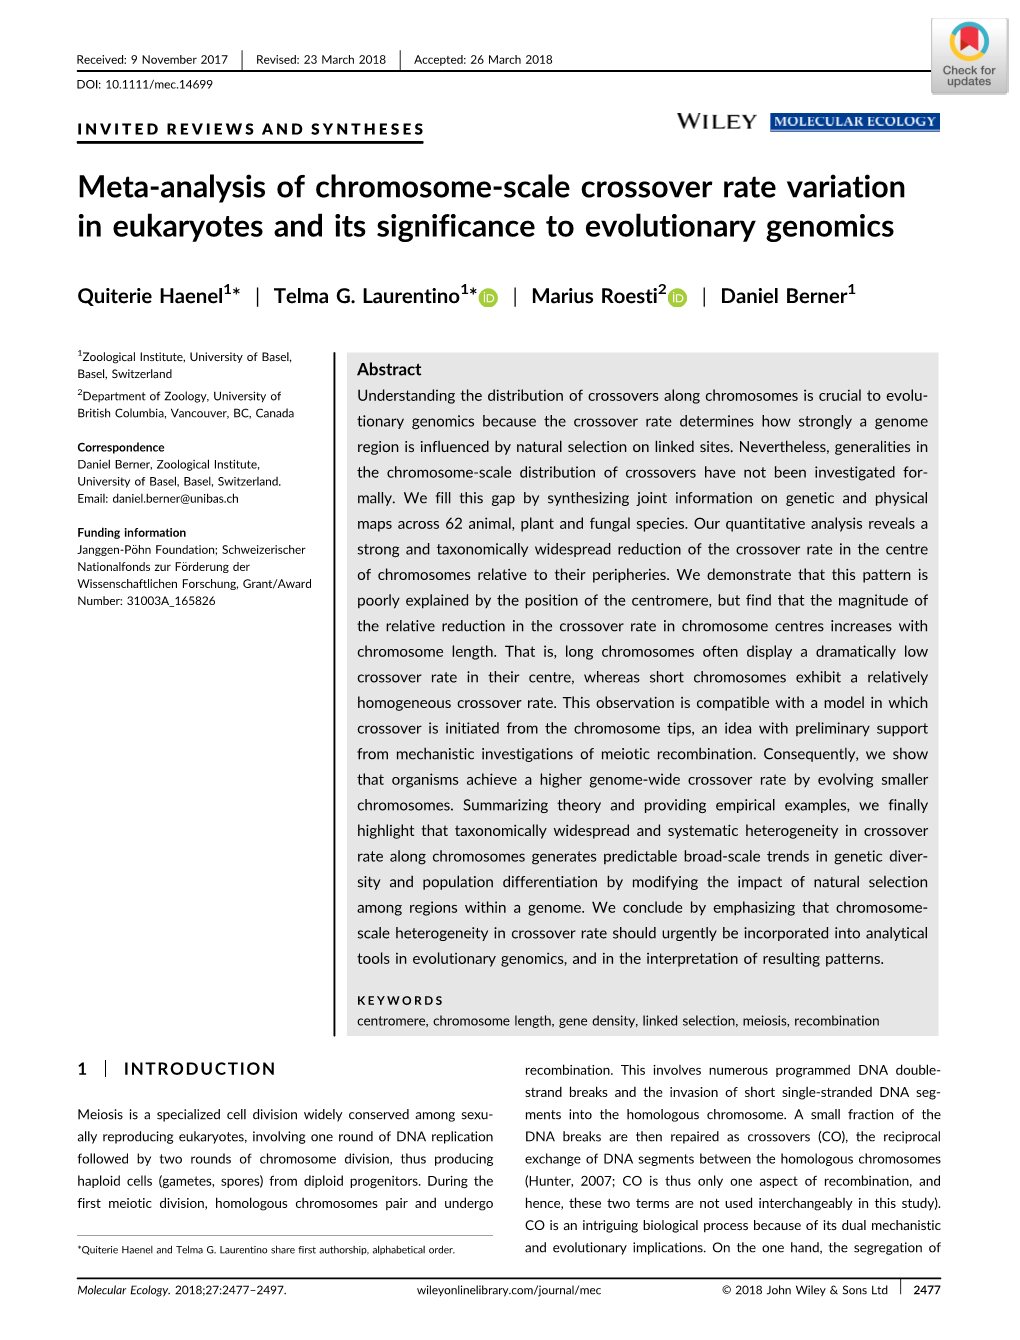 Meta‐Analysis of Chromosome‐Scale Crossover Rate Variation In